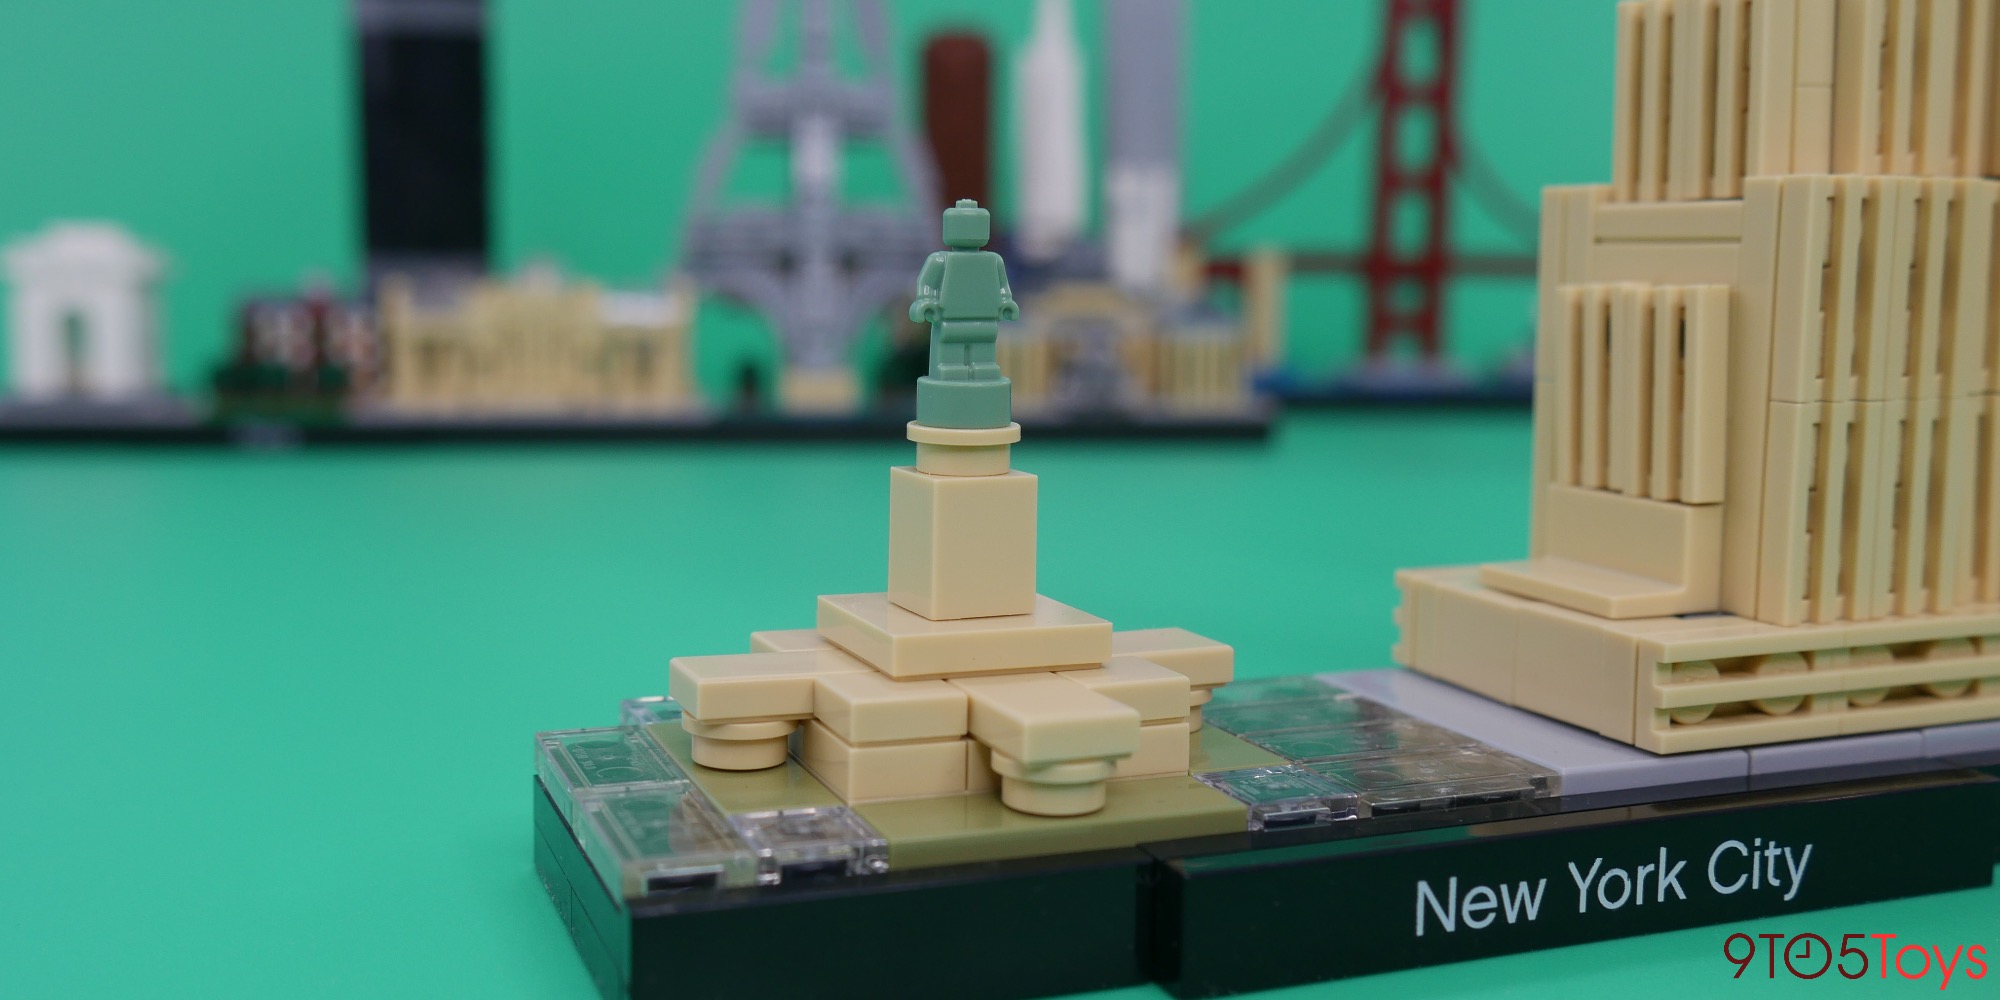 LEGO New York City Skyline: The Big Apple's miniature release - 9to5Toys